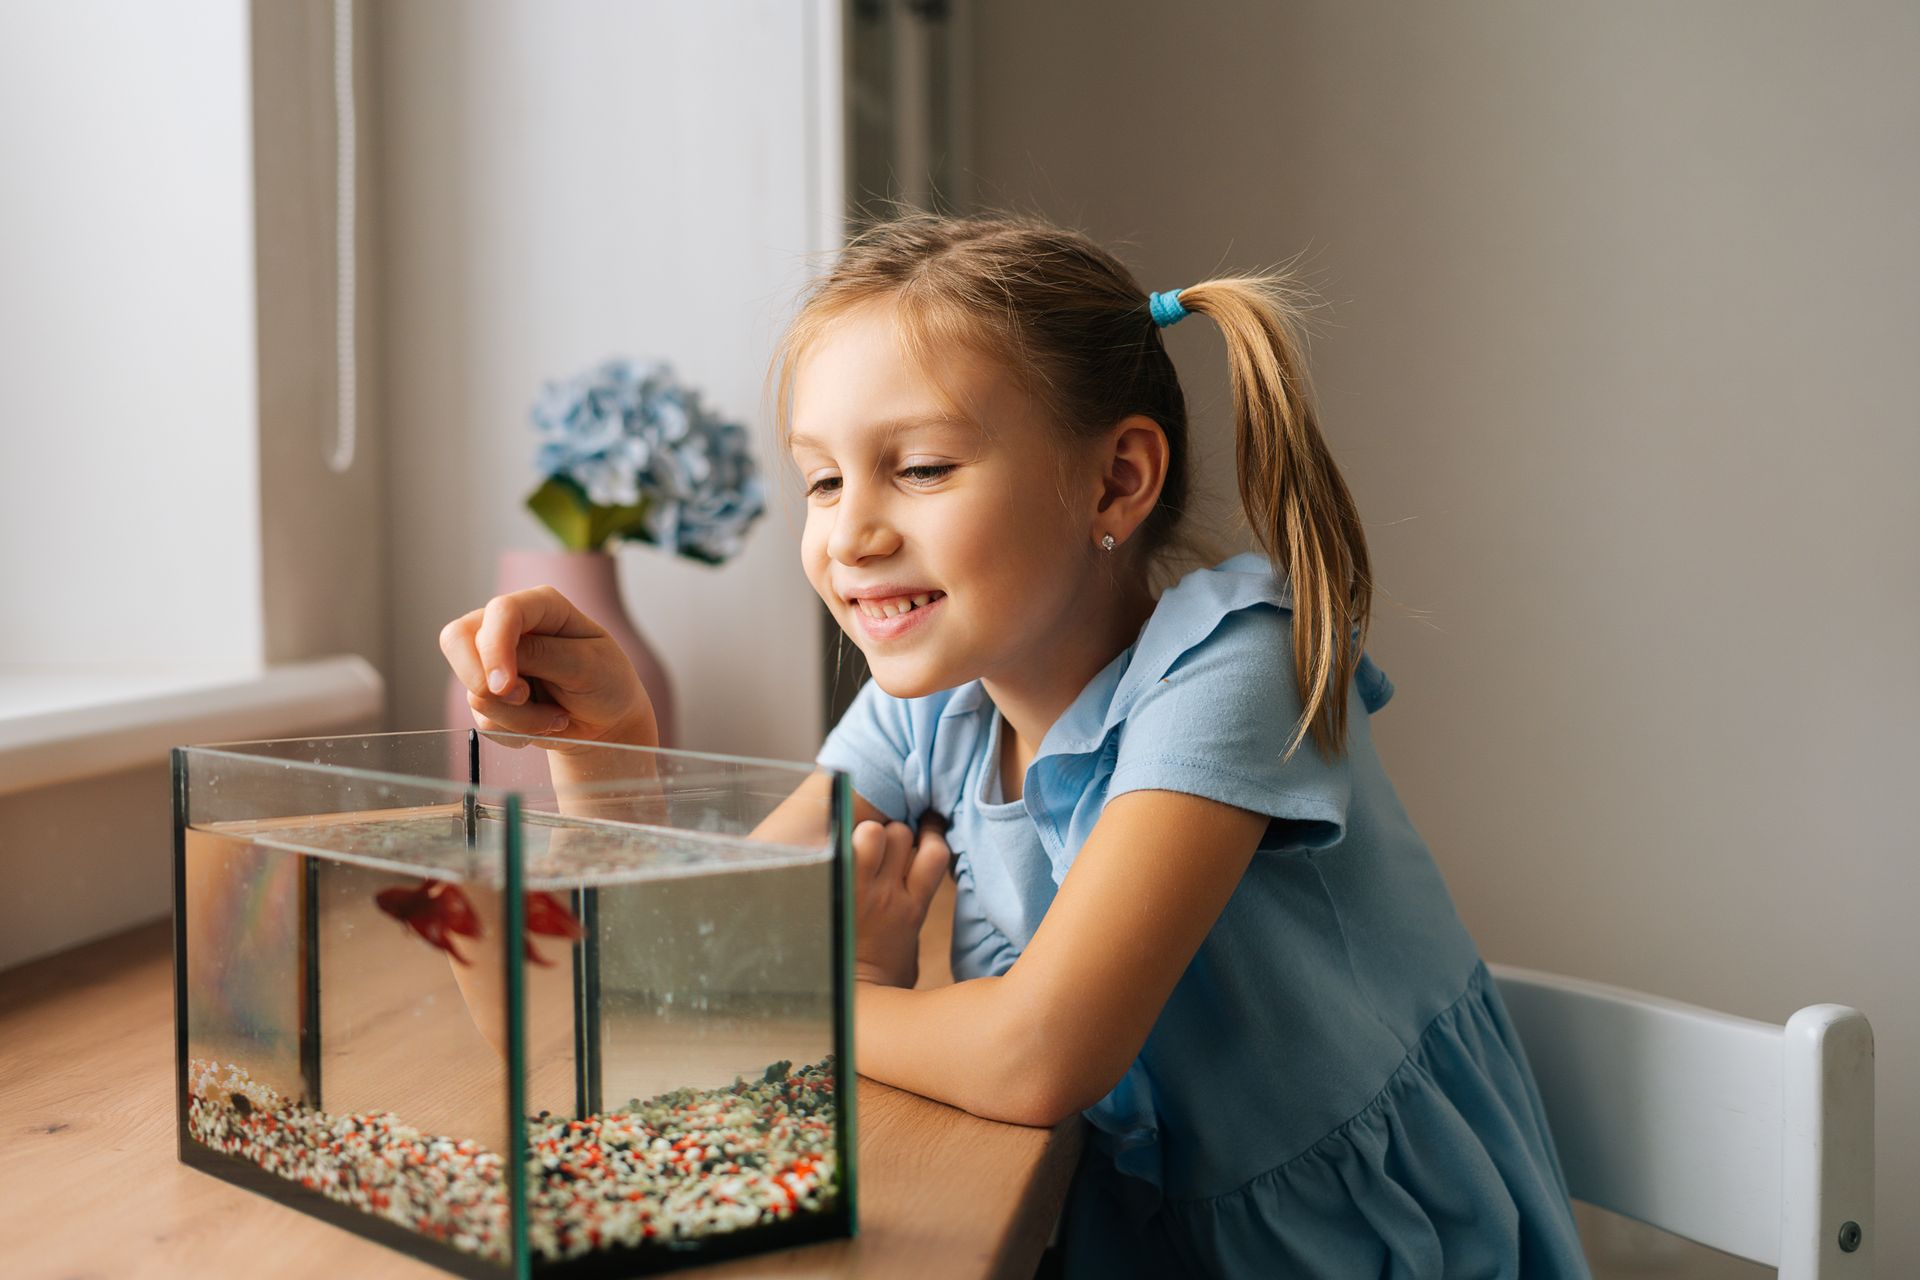 A little girl is sitting at a table looking at a fish tank.